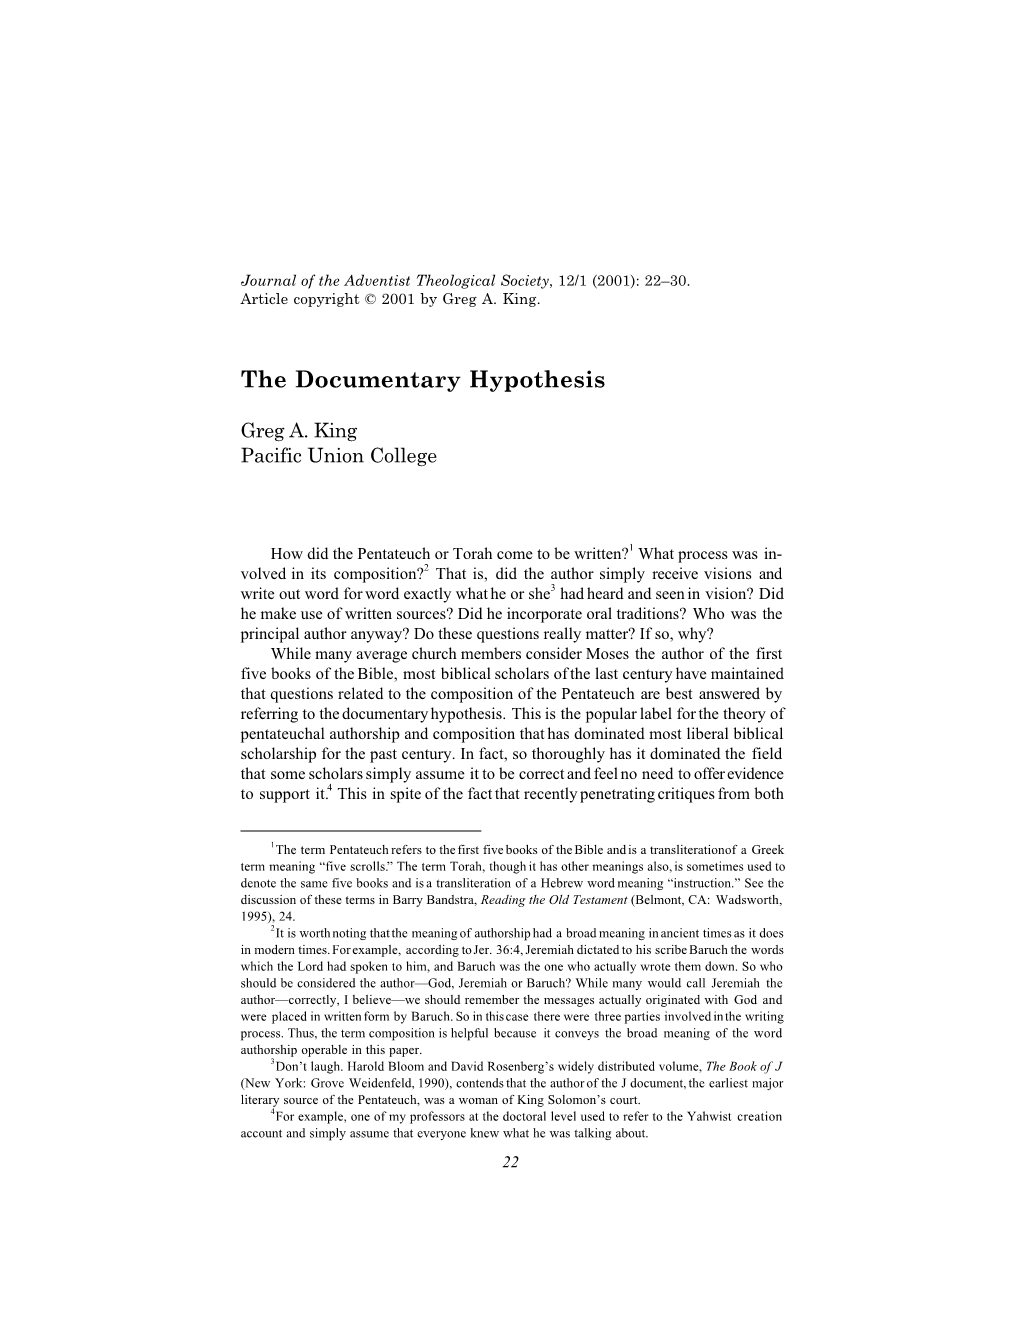 The Documentary Hypothesis